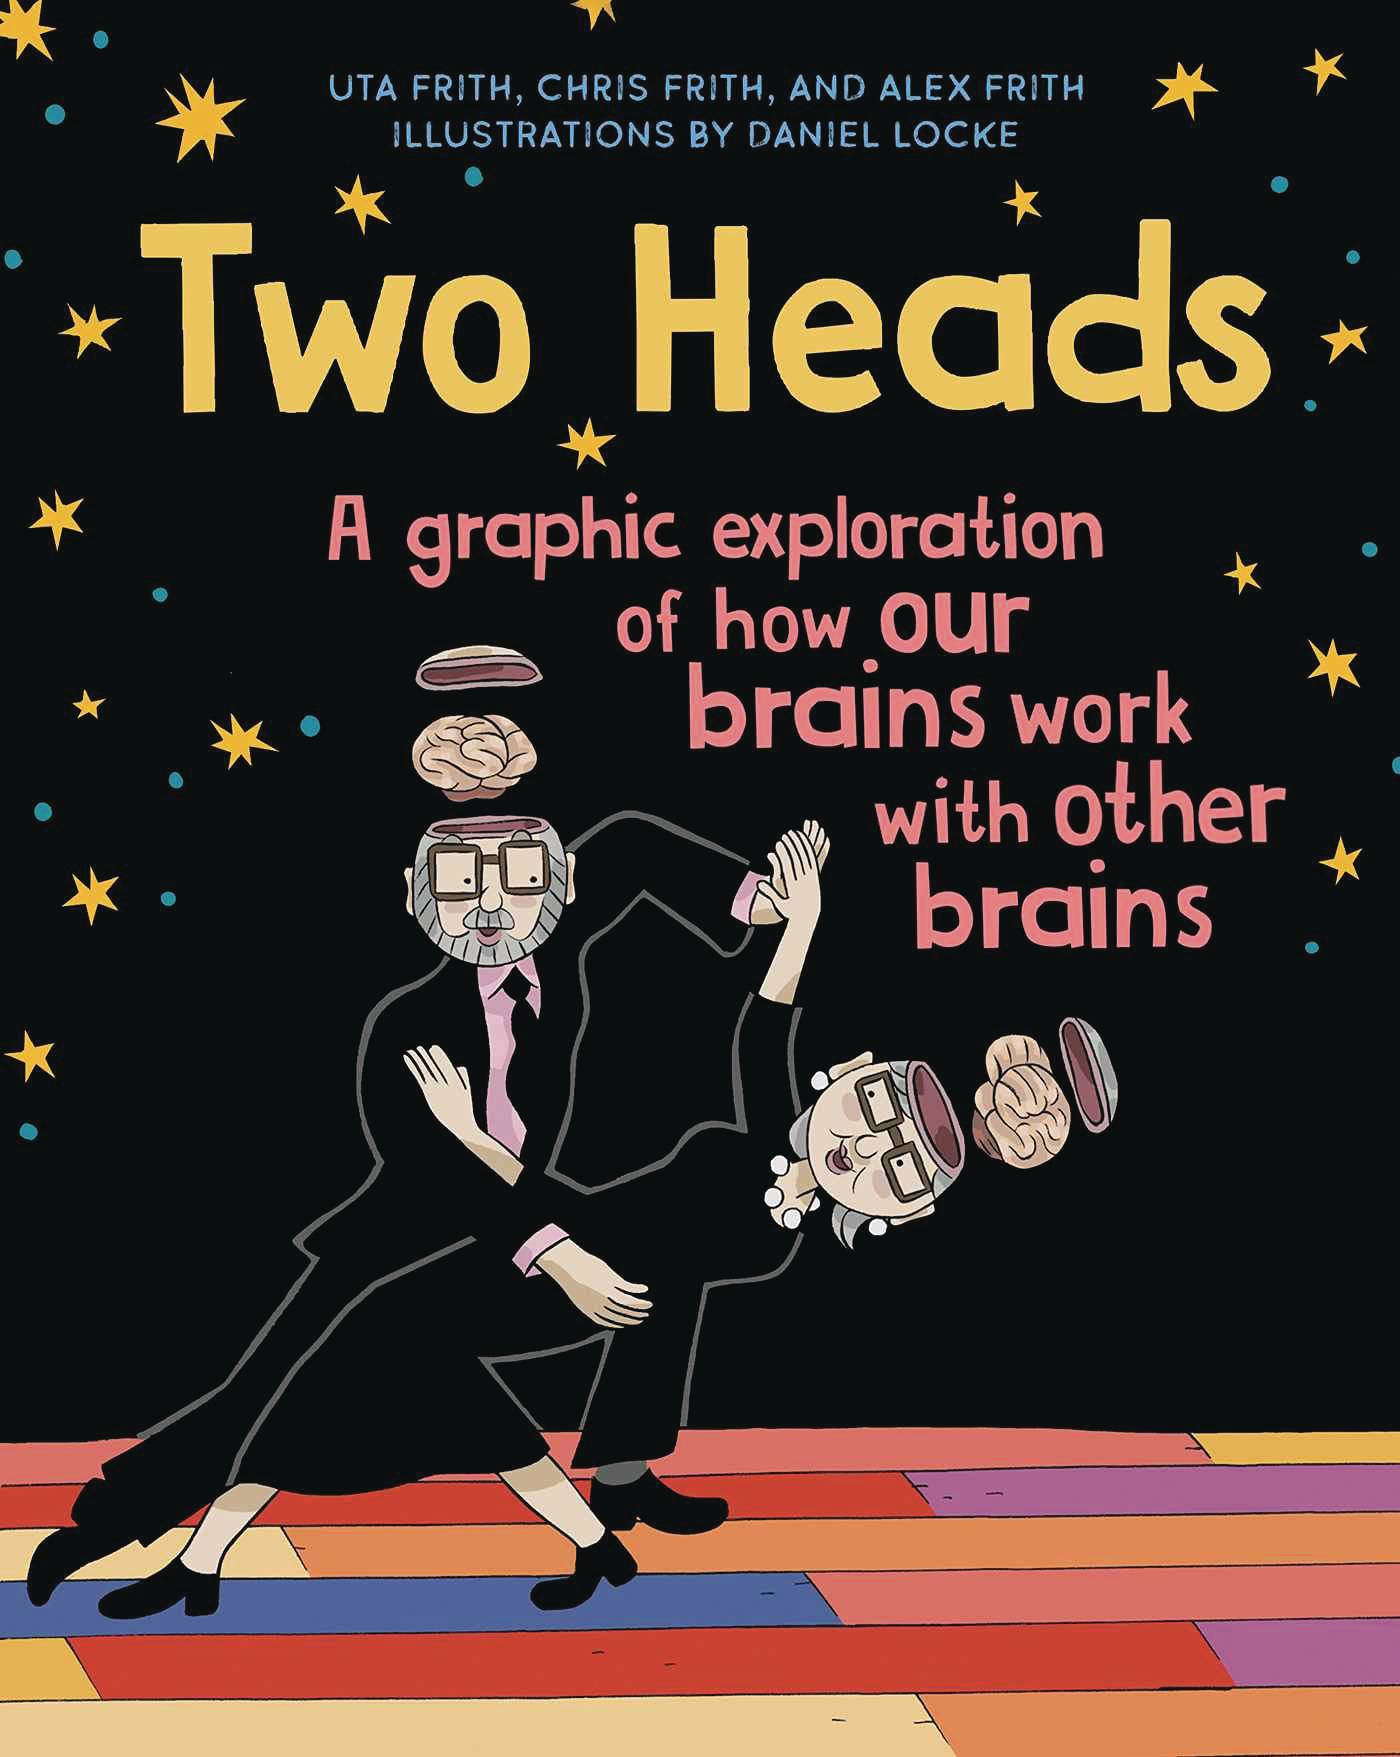 TWO HEADS GRAPHIC EXPLORATION HOW BRAINS WORK OTHER BRAINS (